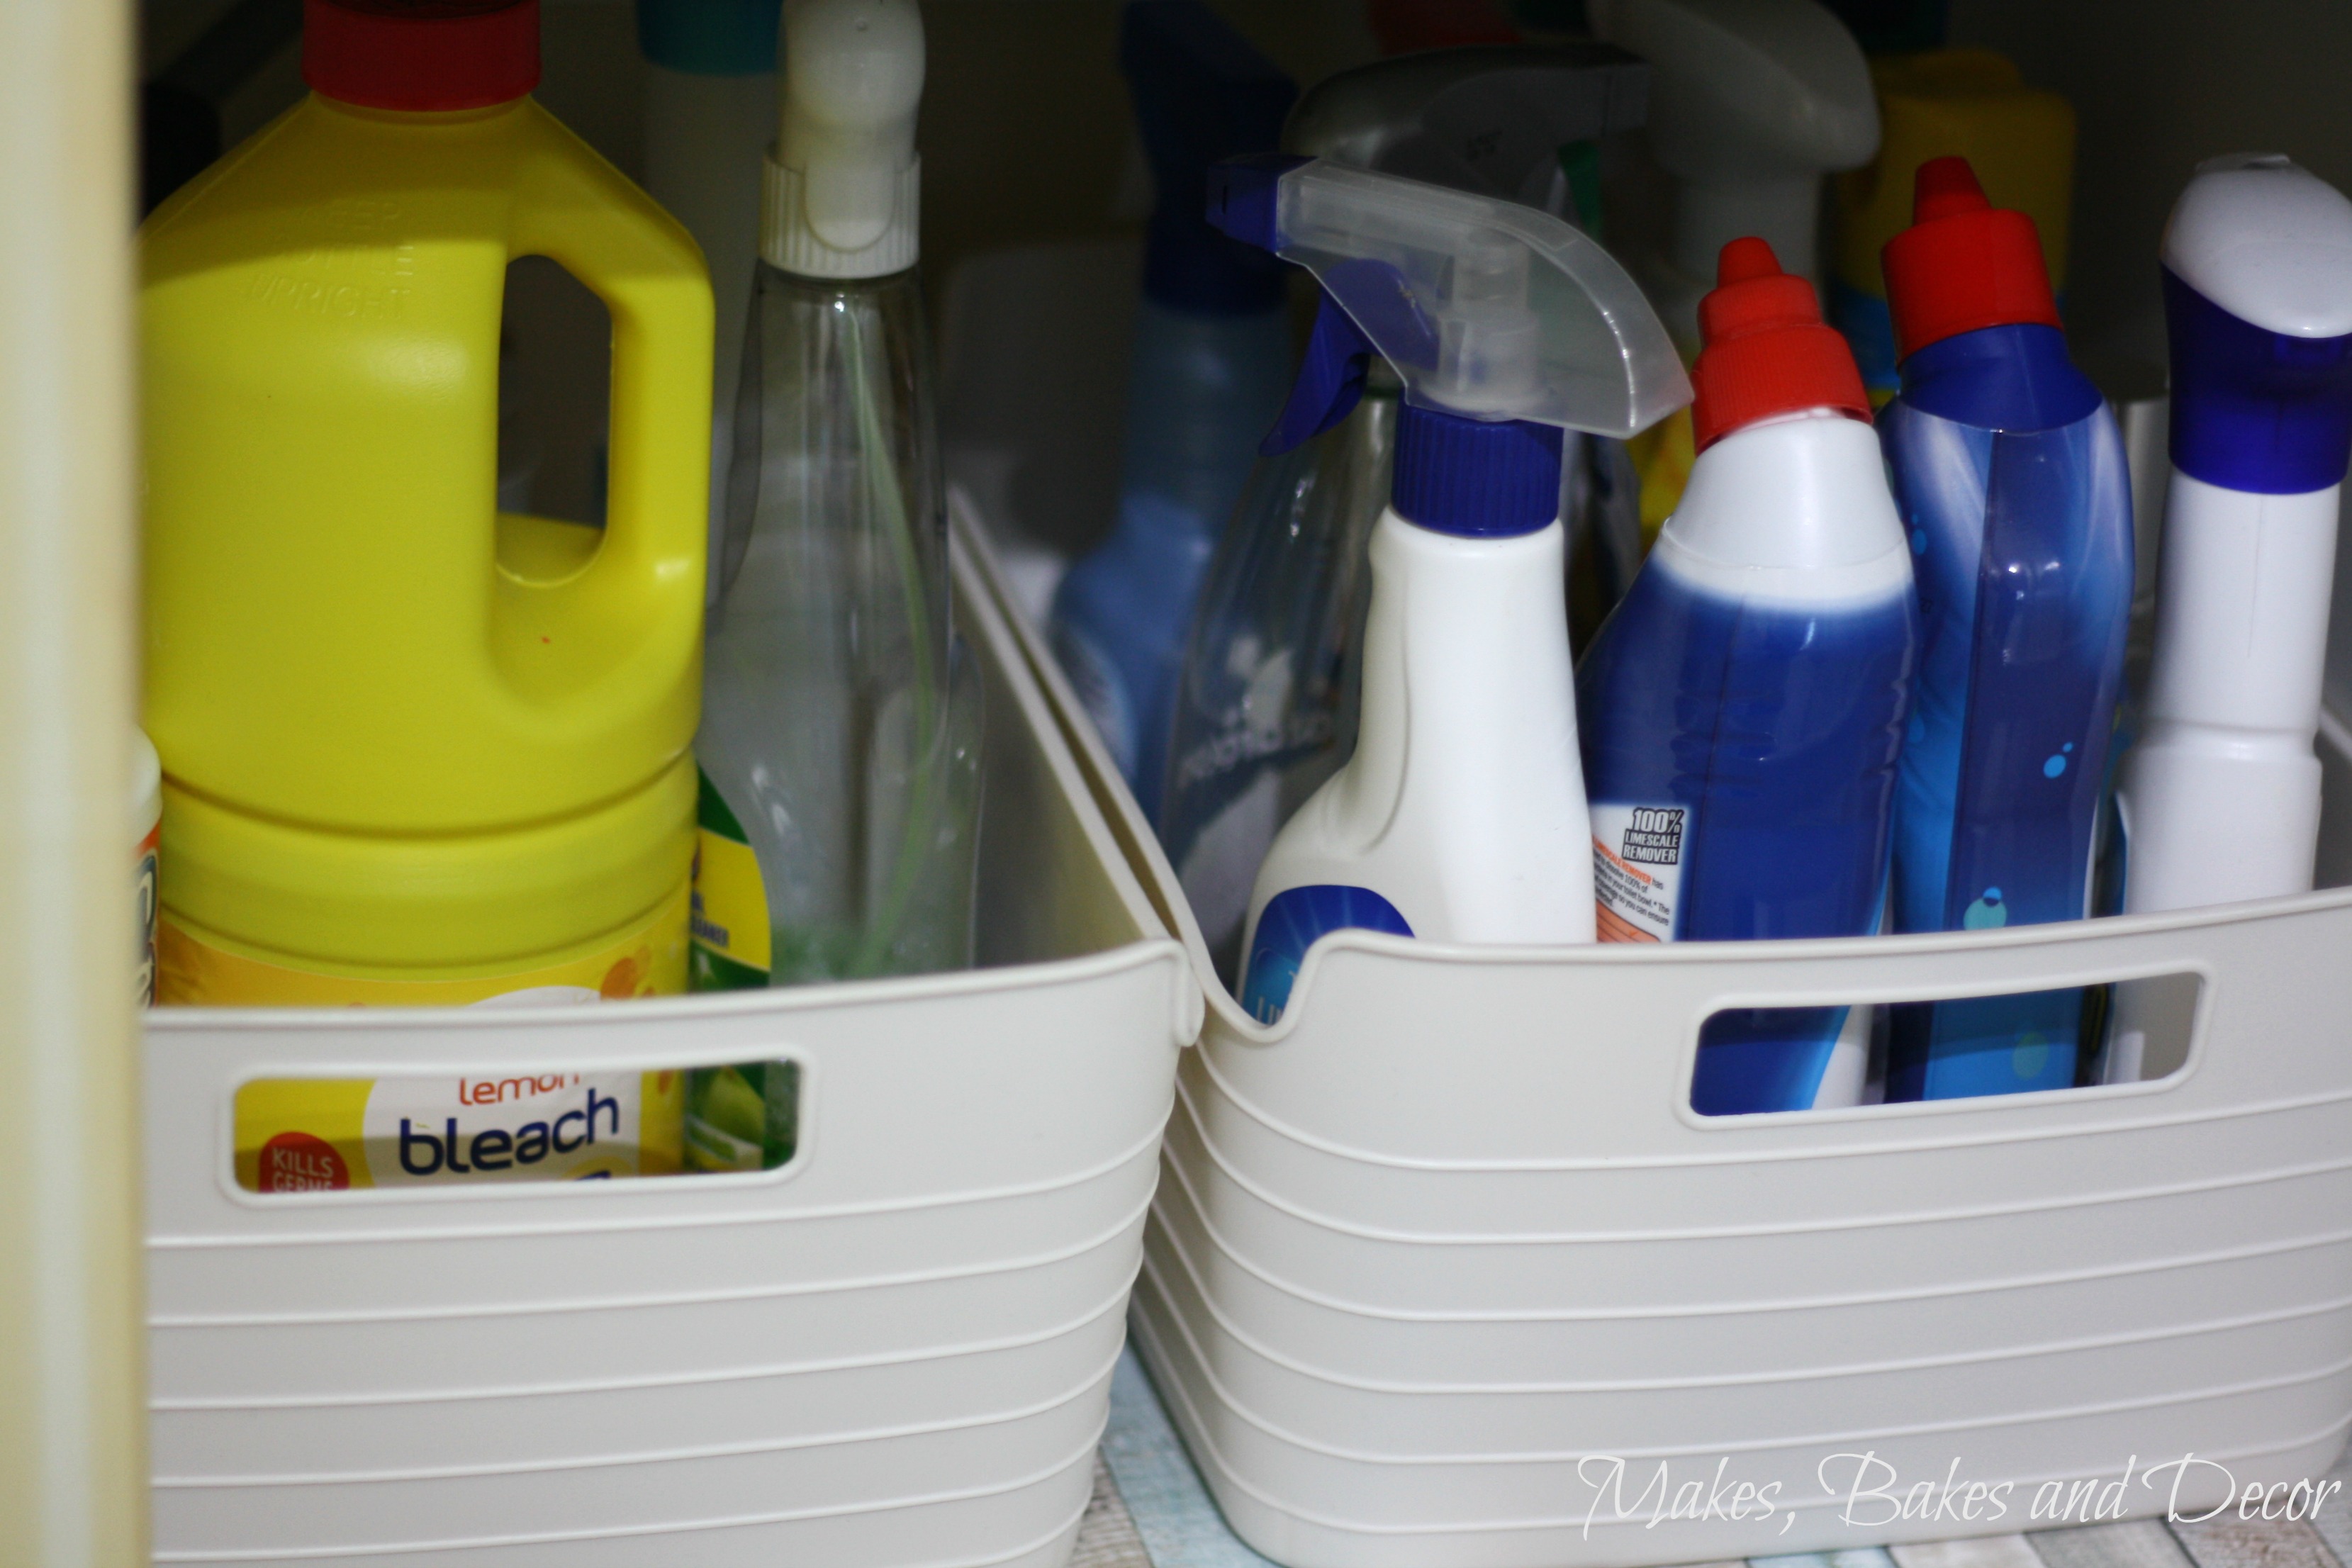 how to organise the cleaning products